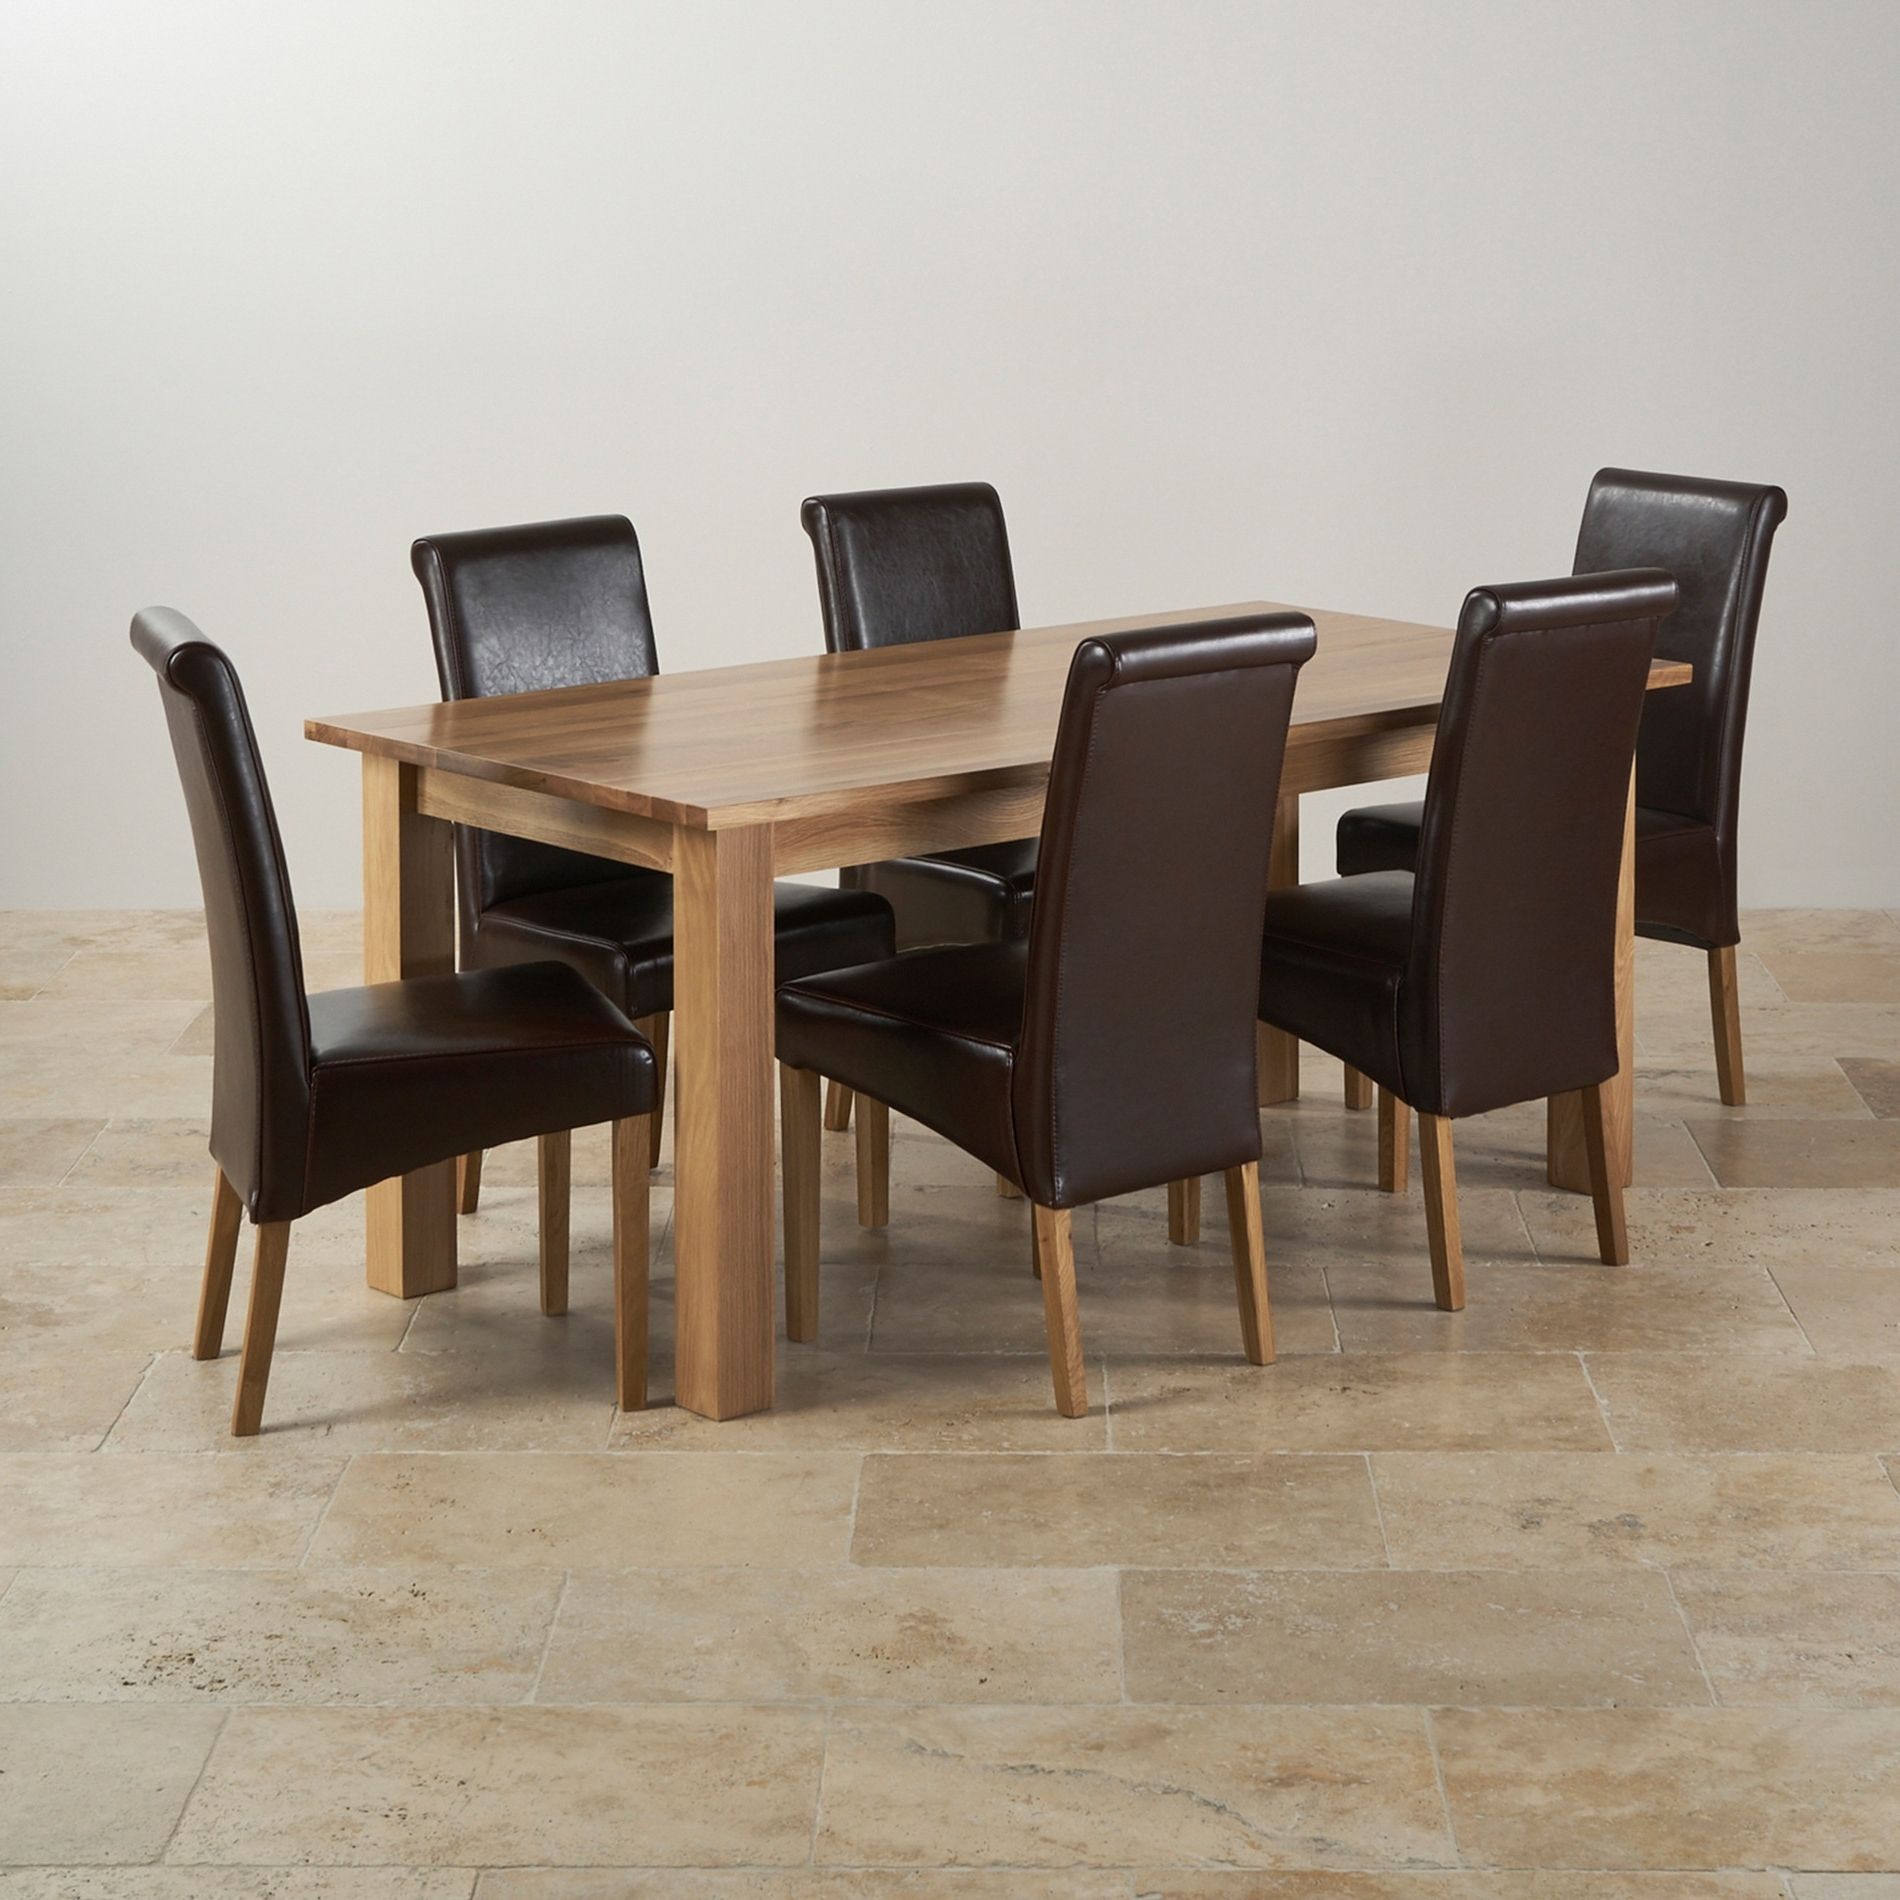 Fashionable Oak Dining Tables And Leather Chairs With Dining Room Tables Oak Furniture Land Ever X Wood Tufted Dining Room (View 13 of 25)